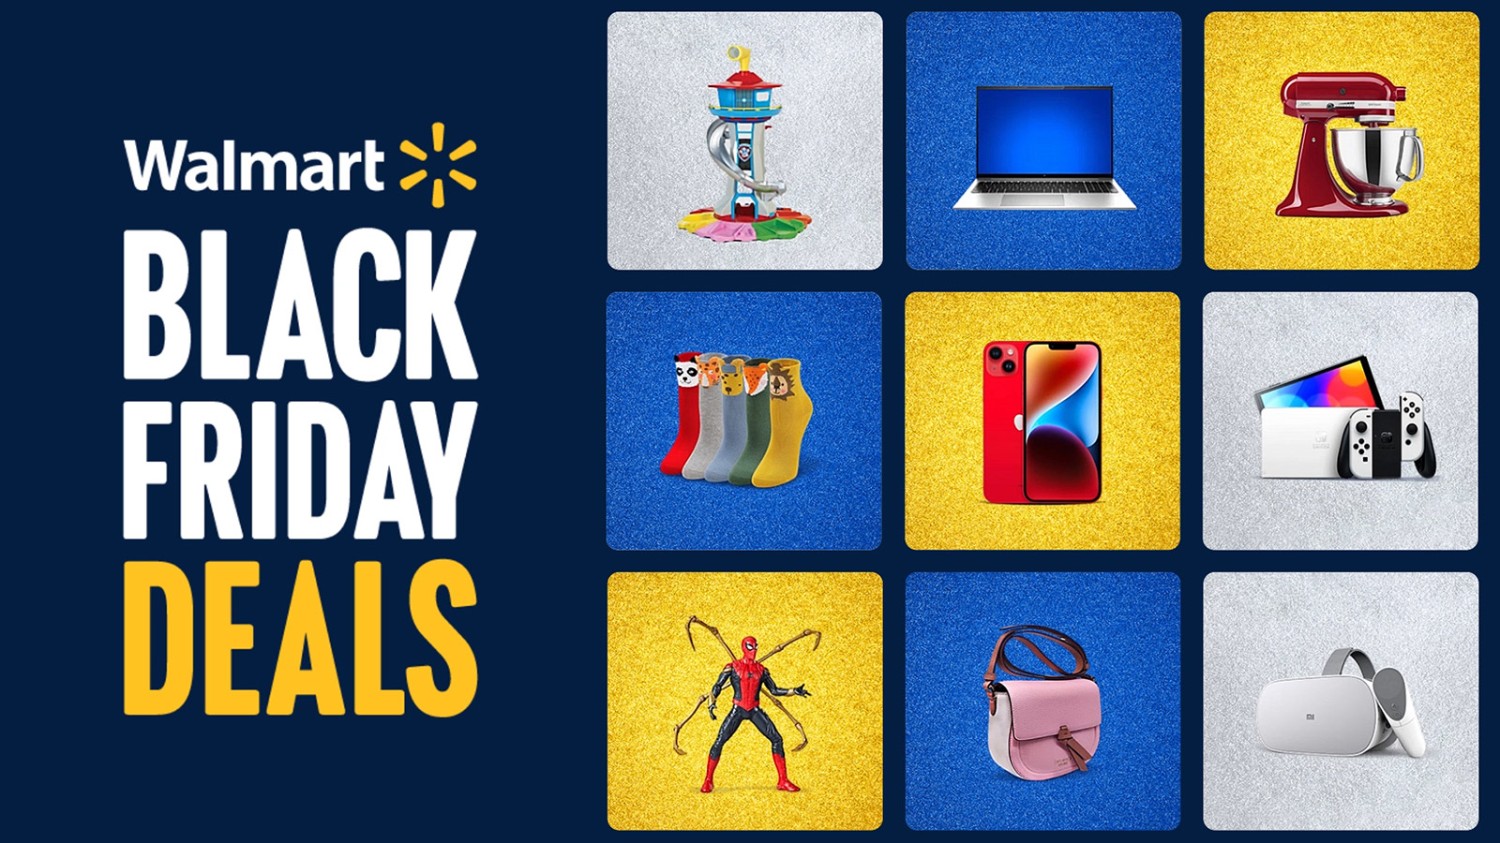 https://corporate.walmart.com/content/corporate/en_us/news/2023/11/01/walmarts-black-friday-deals-are-back-with-major-savings-and-early-access-shopping-for-walmart-plus-members/jcr:content/newsimage.img.jpg/1698786713879.jpg